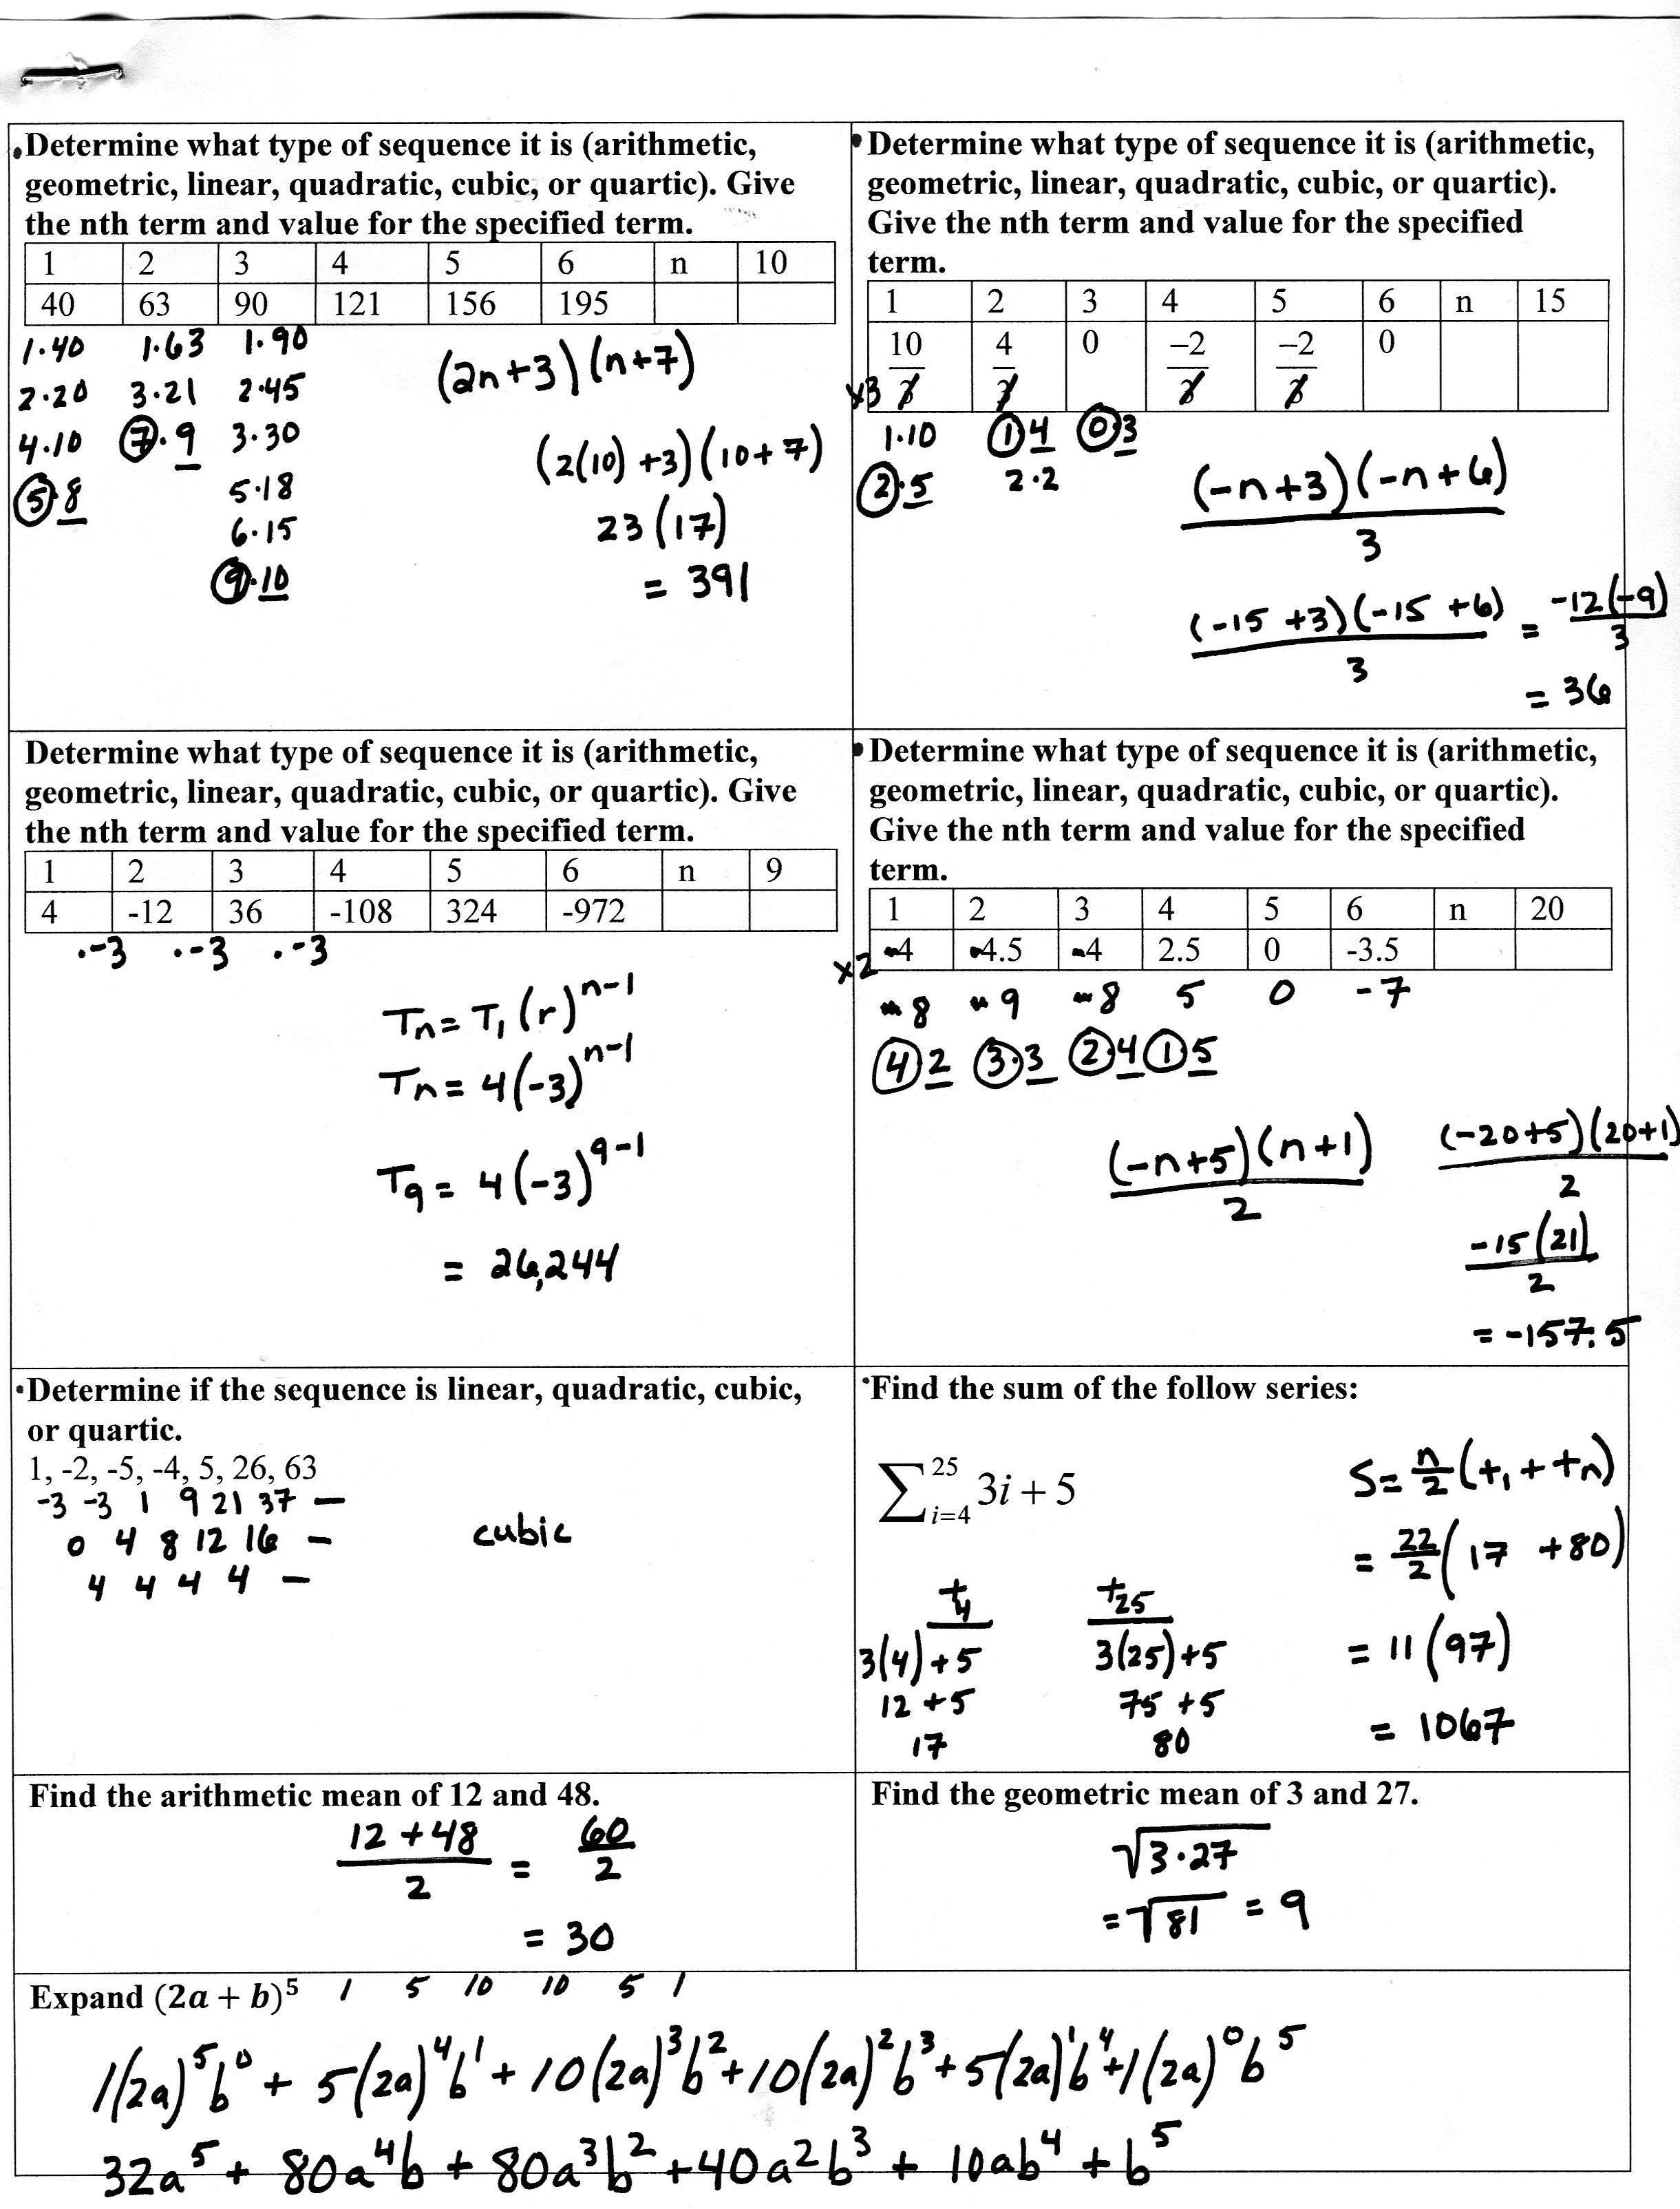 sequences-and-series-worksheet-answers-db-excel